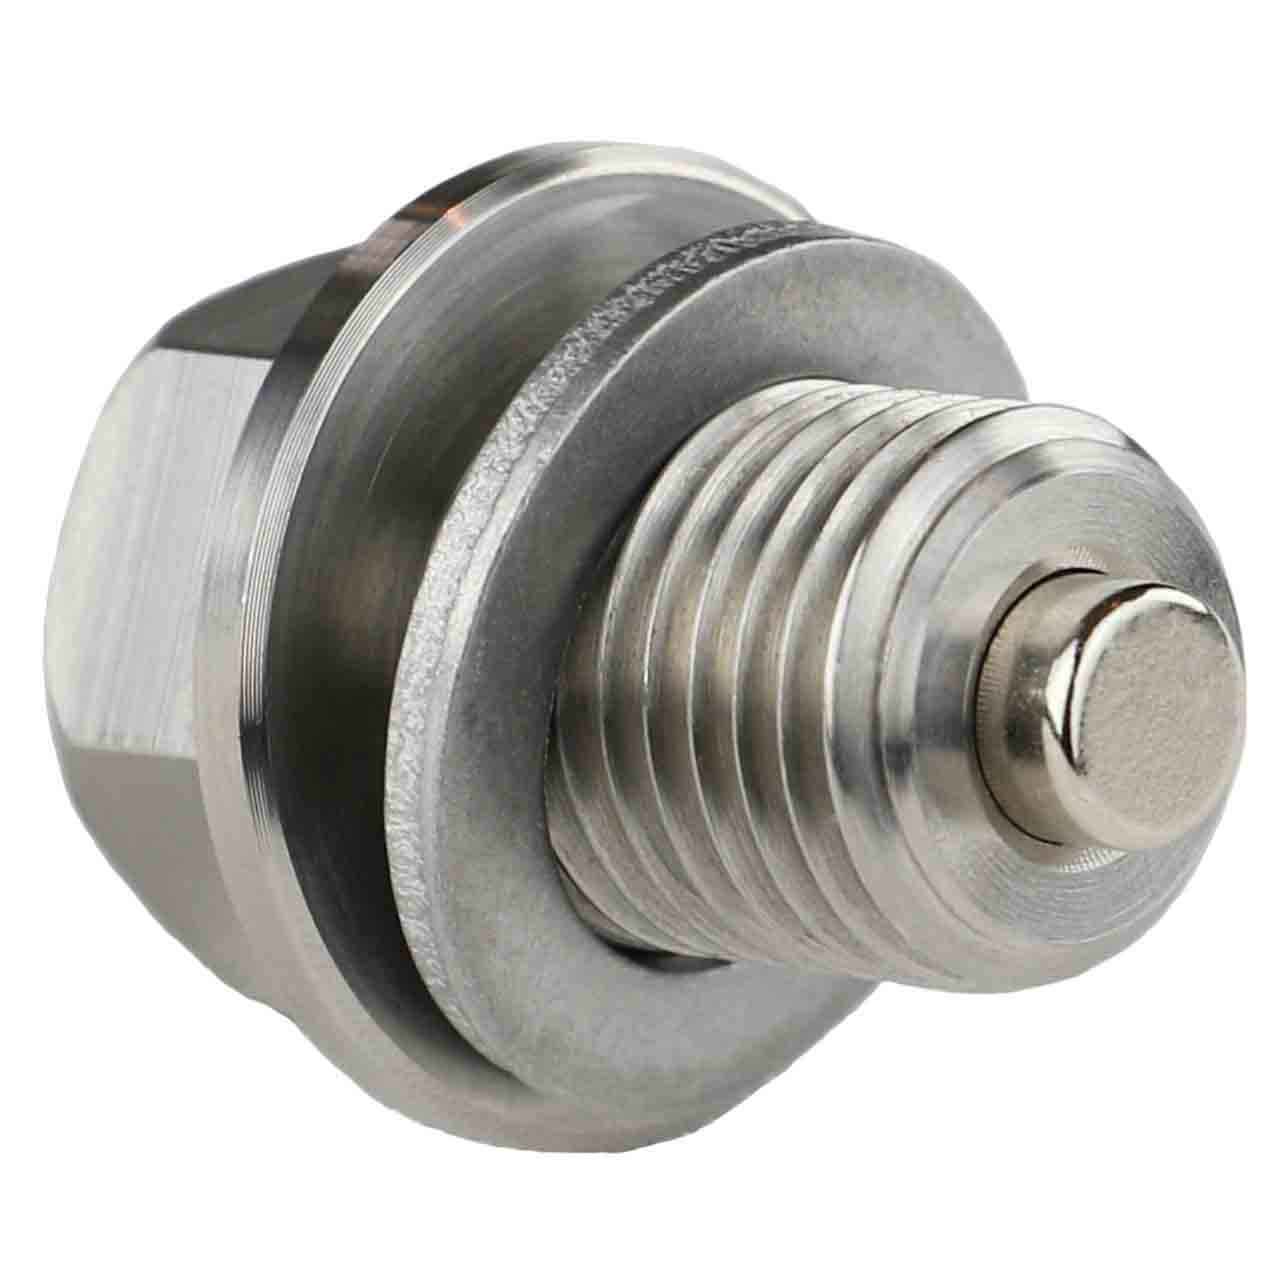 3090090 for Polaris - Stainless Steel Magnetic Oil Drain Plug with Neodymium Magnet - Made In USA